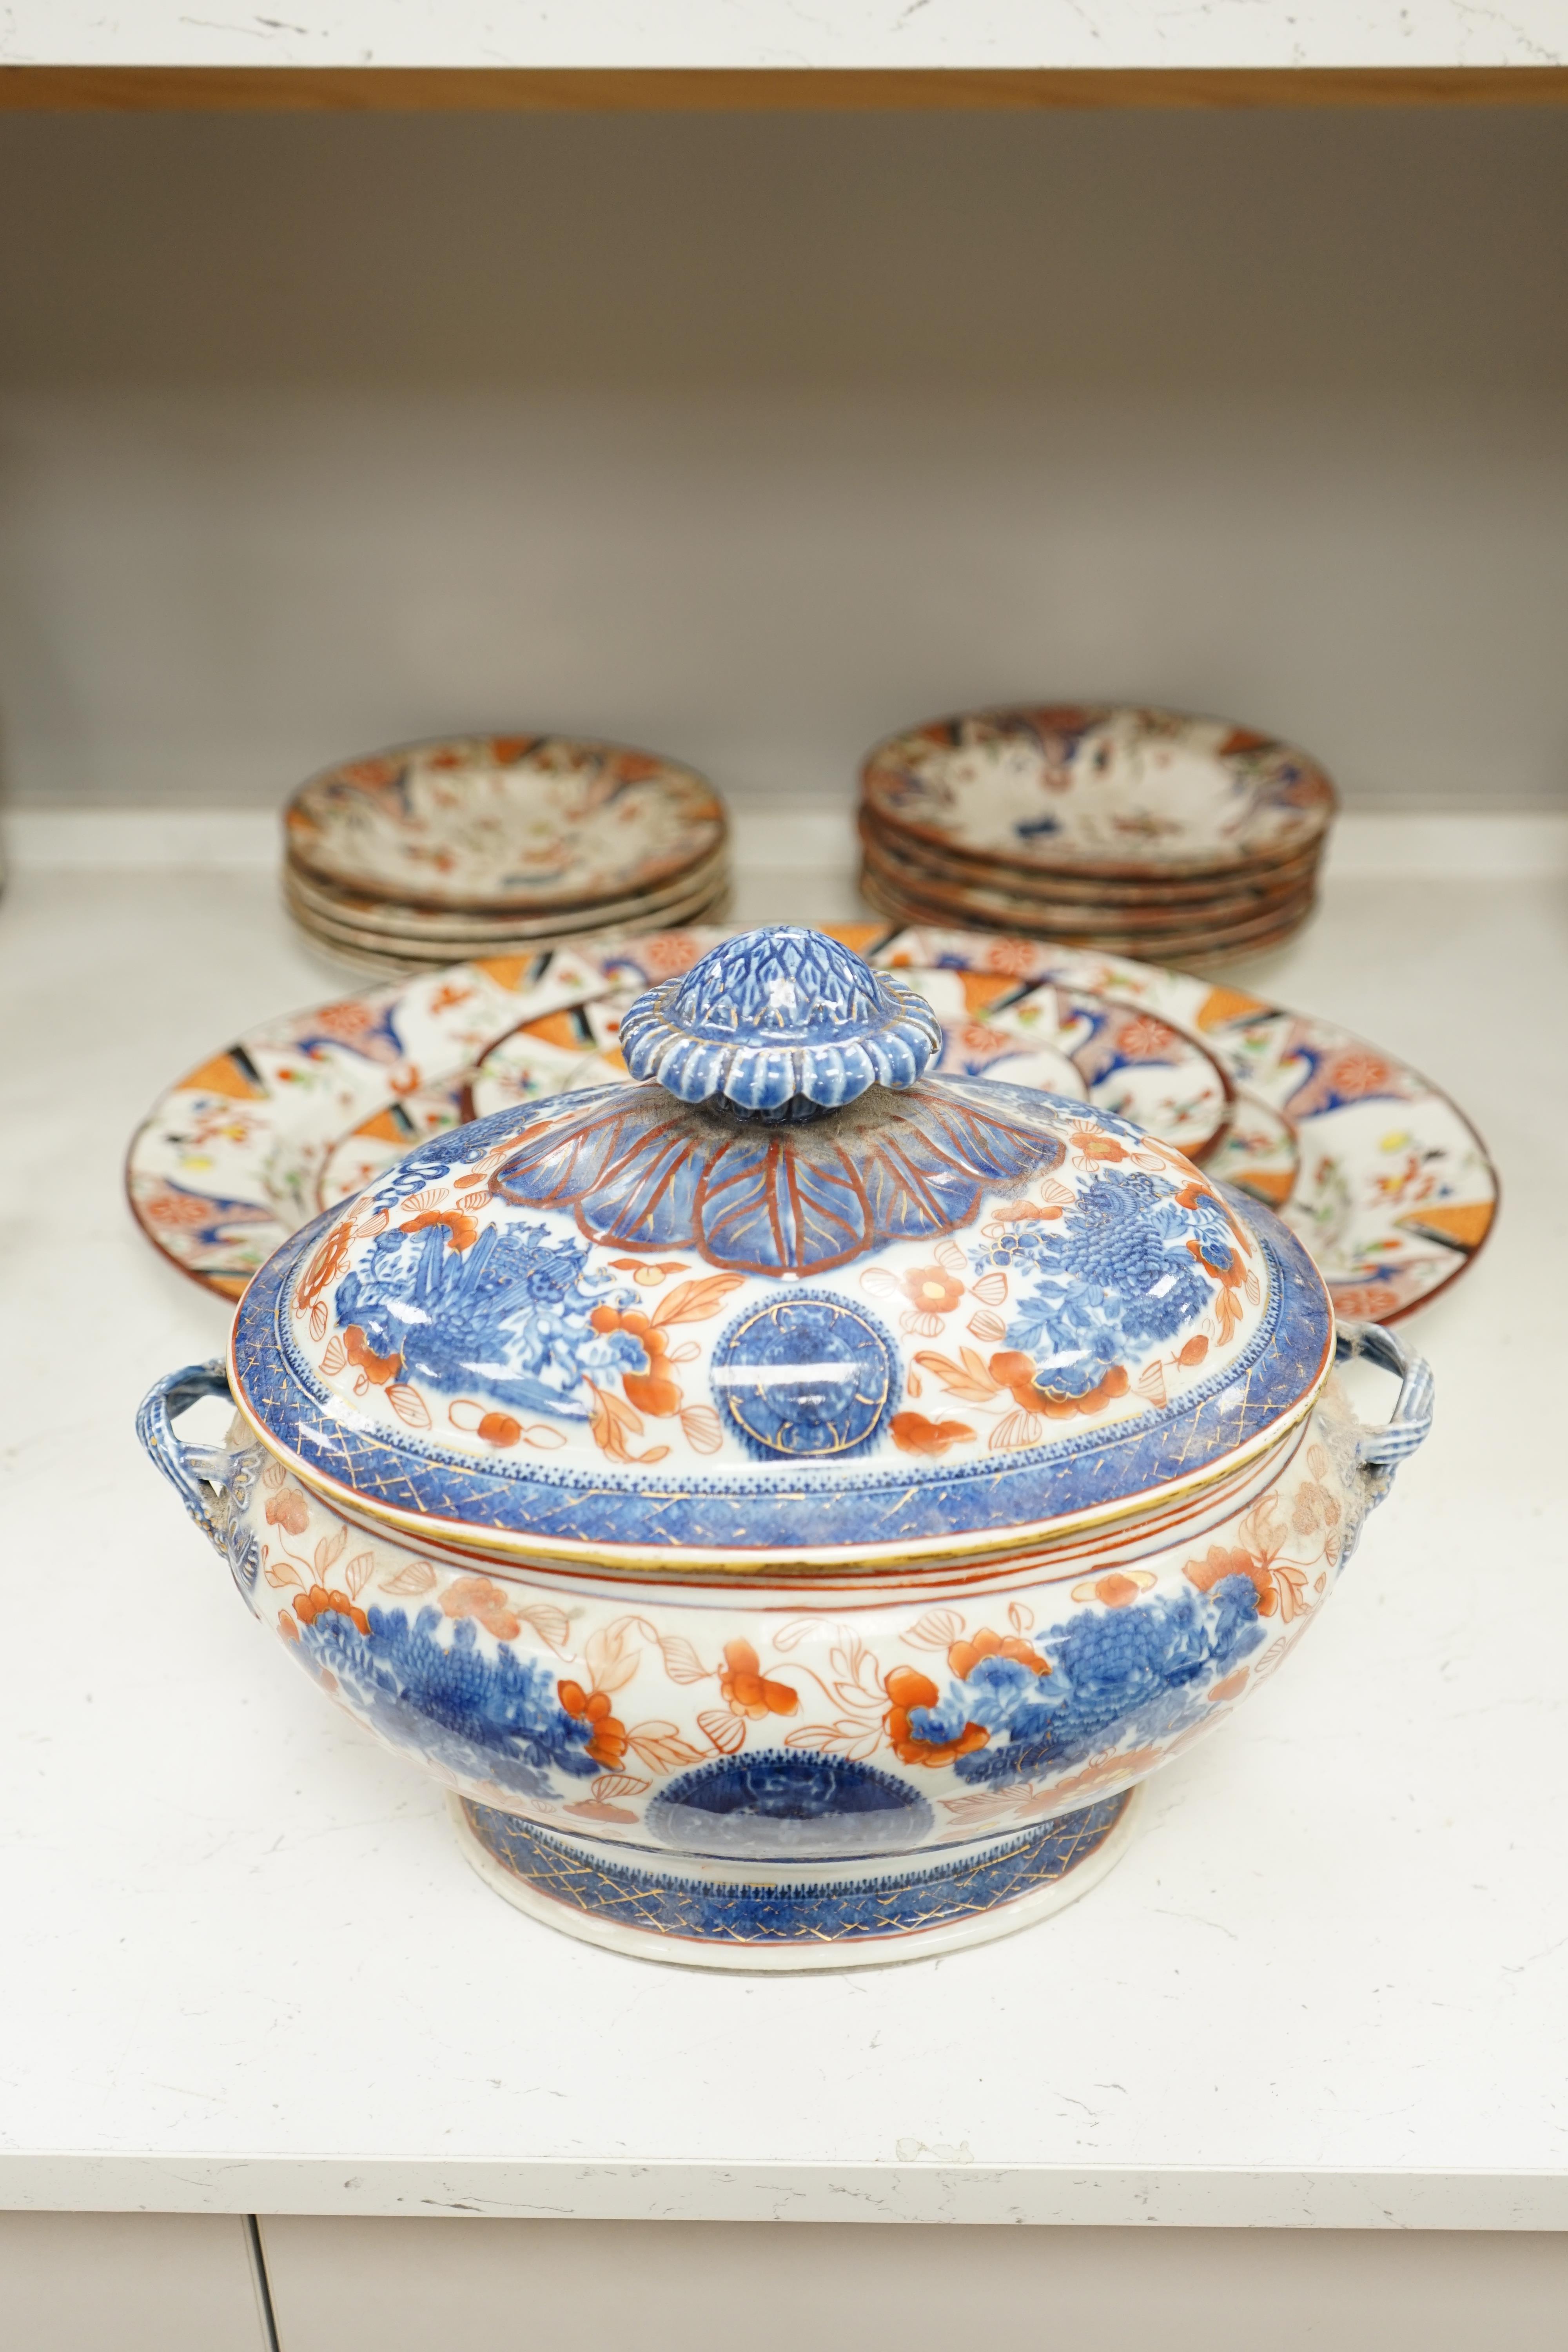 A Chinese export Imari pattern tureen and cover, Qianlong period, collection of Victorian plates and dishes together with an Imari pattern tureen and cover